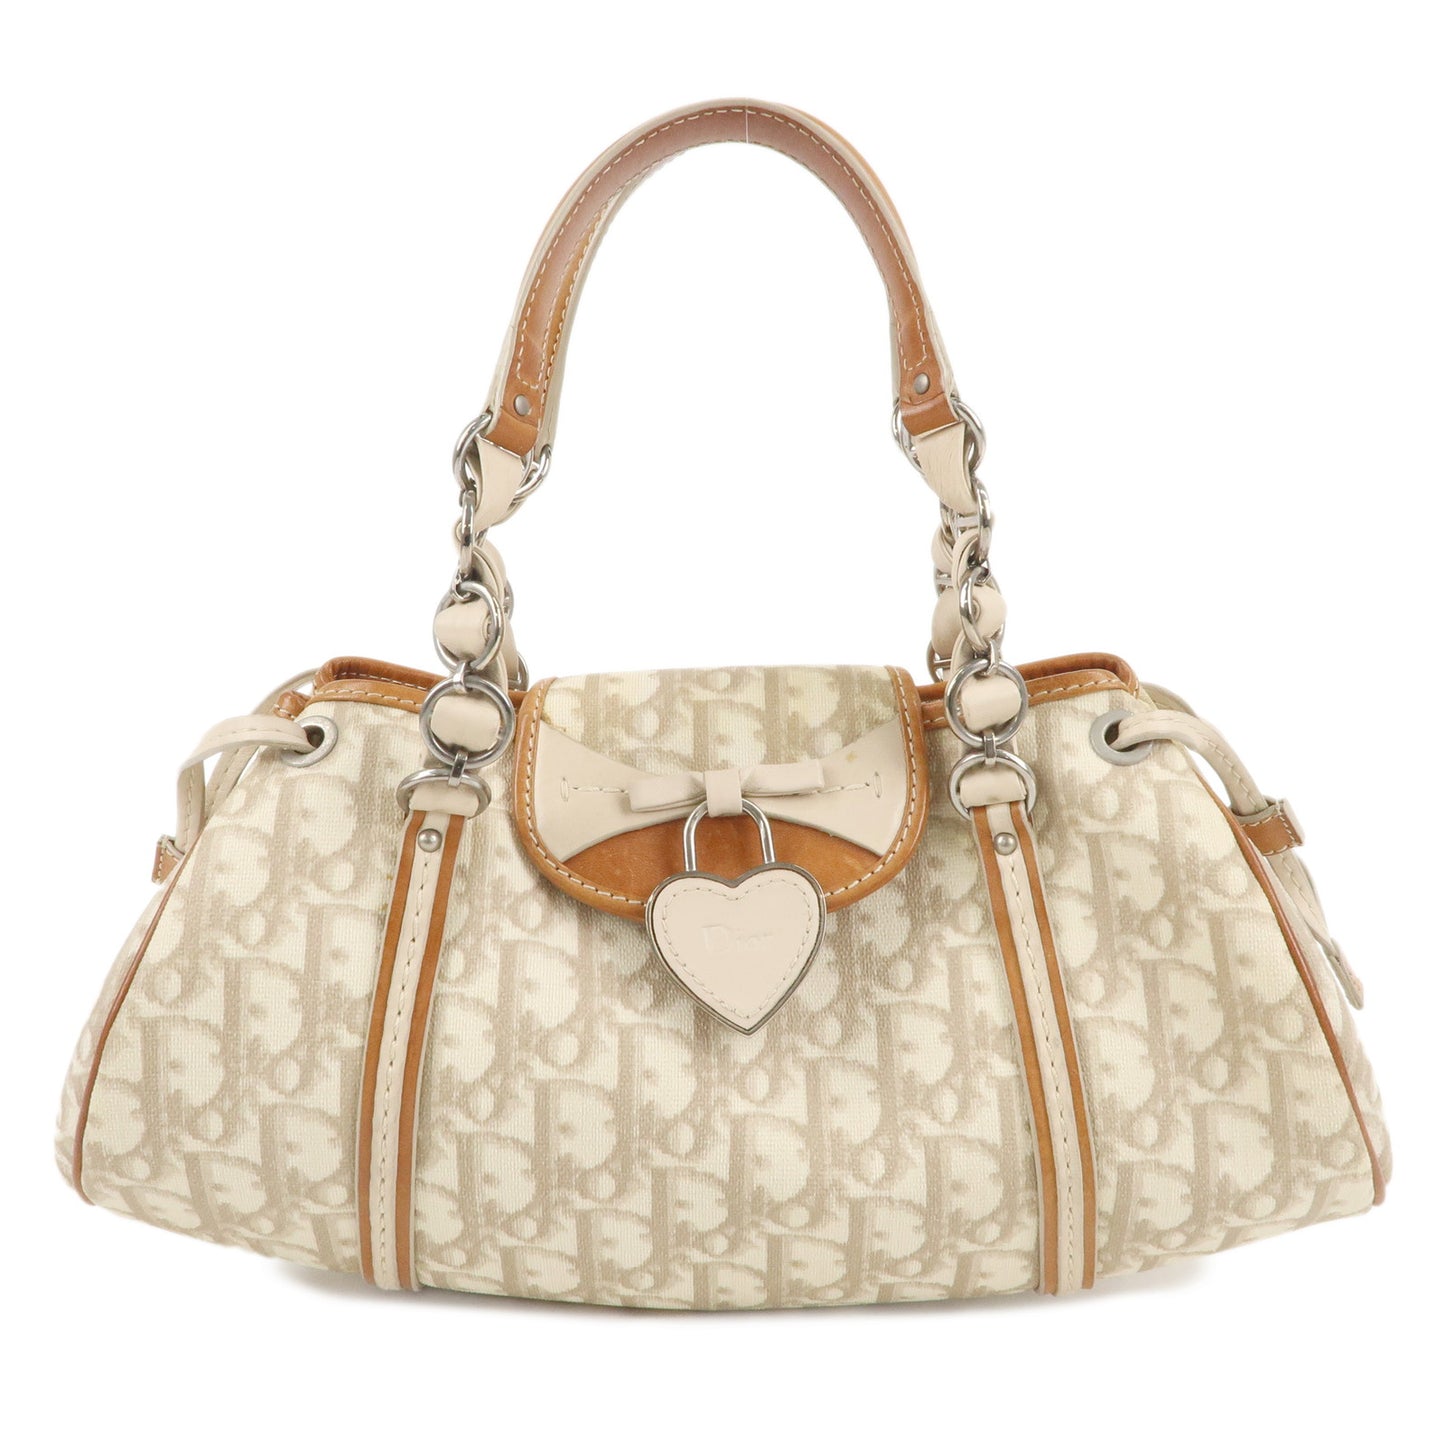 Christian-Dior-Trotter-PVC-Leather-Hand-Bag-Beige-Brown